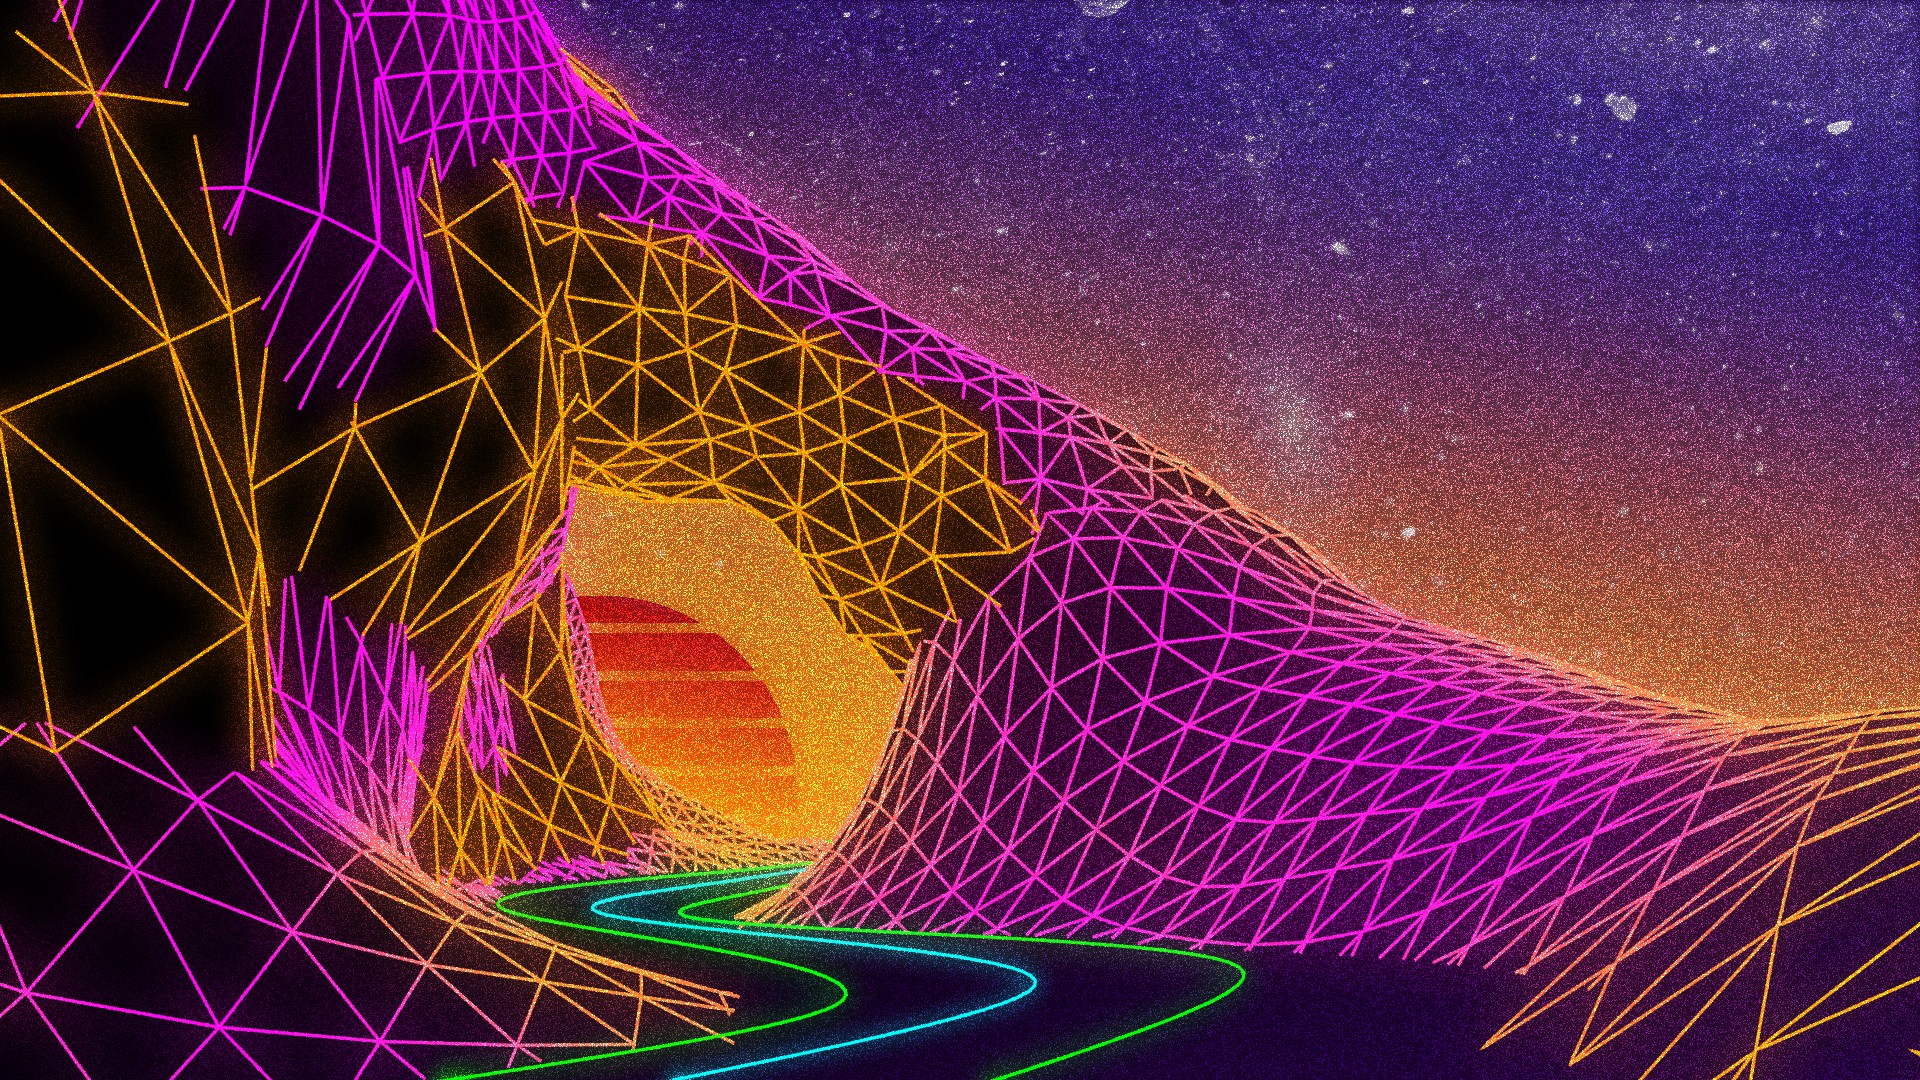 New Retro Wave, Sun, Wireframe, Road Wallpapers HD / Desktop and Mobile